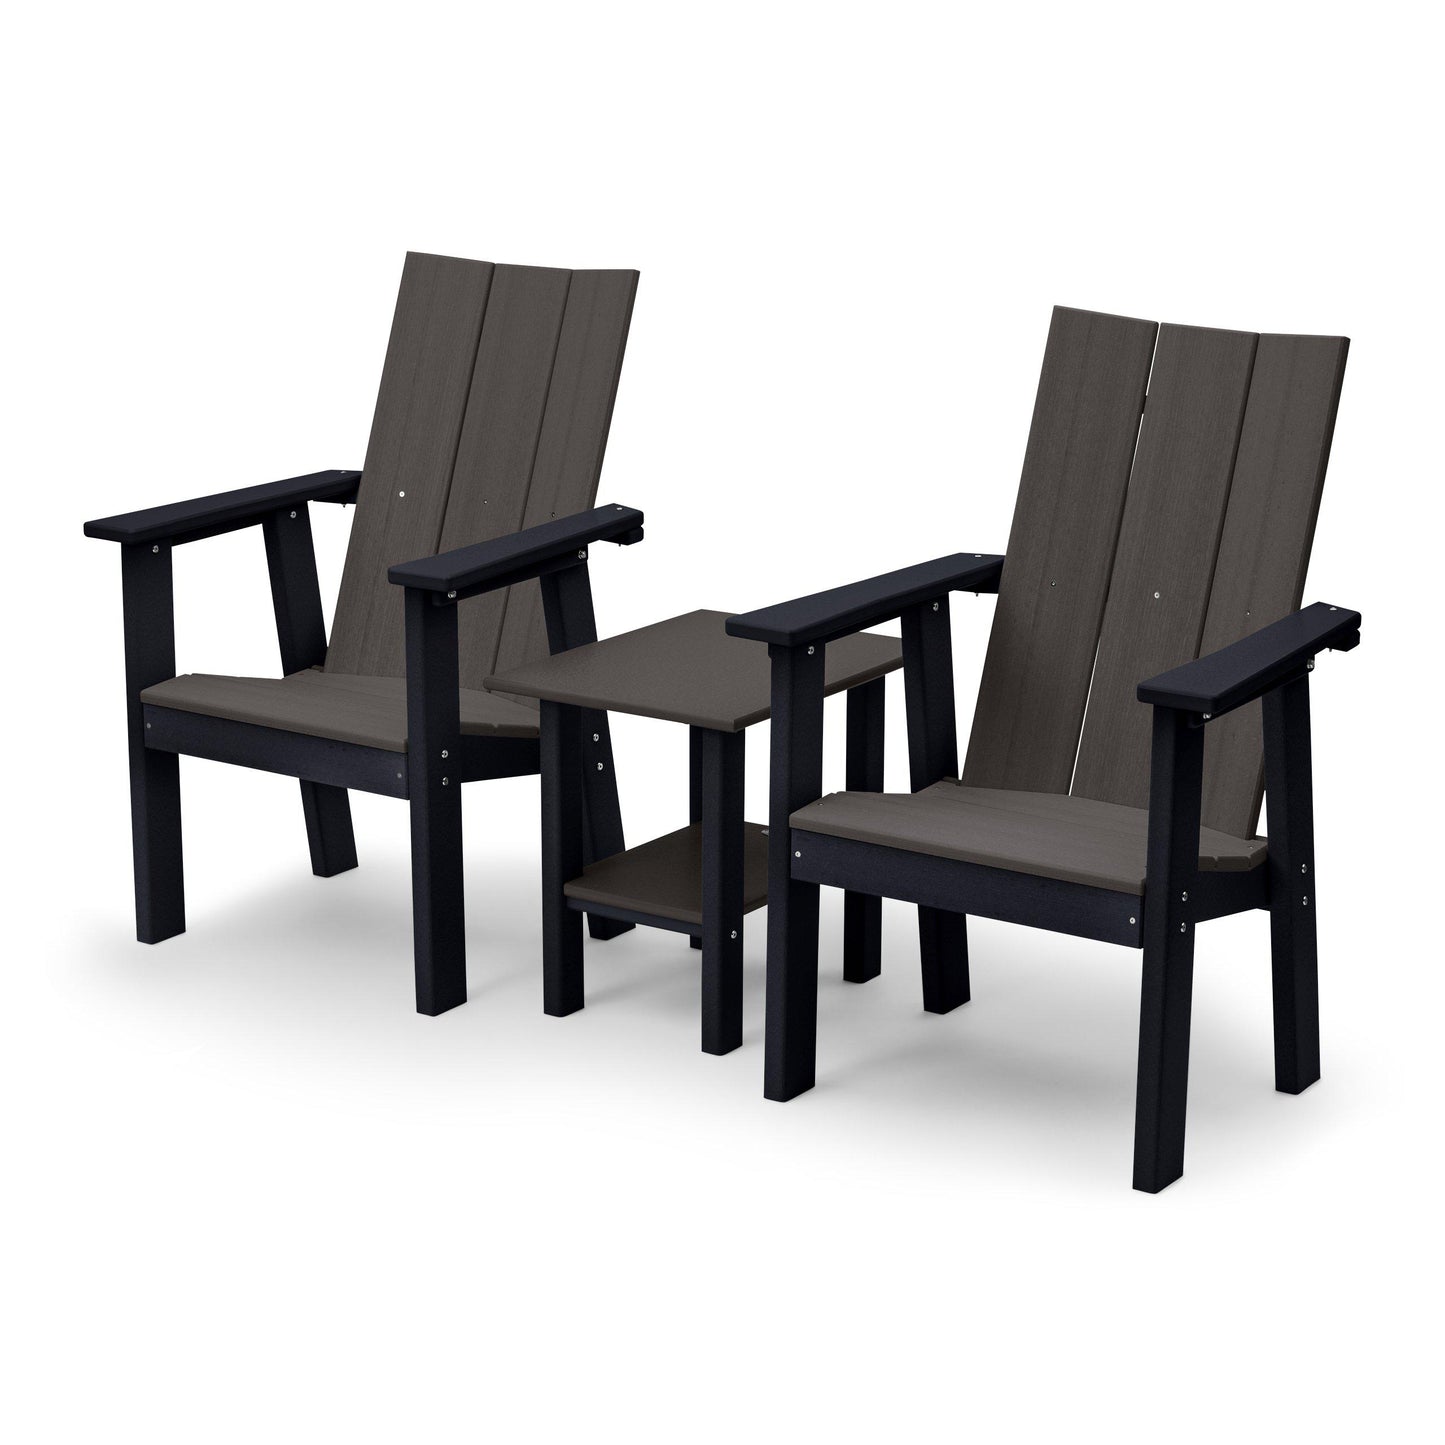 Perfect Choice Outdoor Furniture Recycled Plastic Stanton Upright Adirondack Chair Set - LEAD TIME TO SHIP 4 WEEKS OR LESS